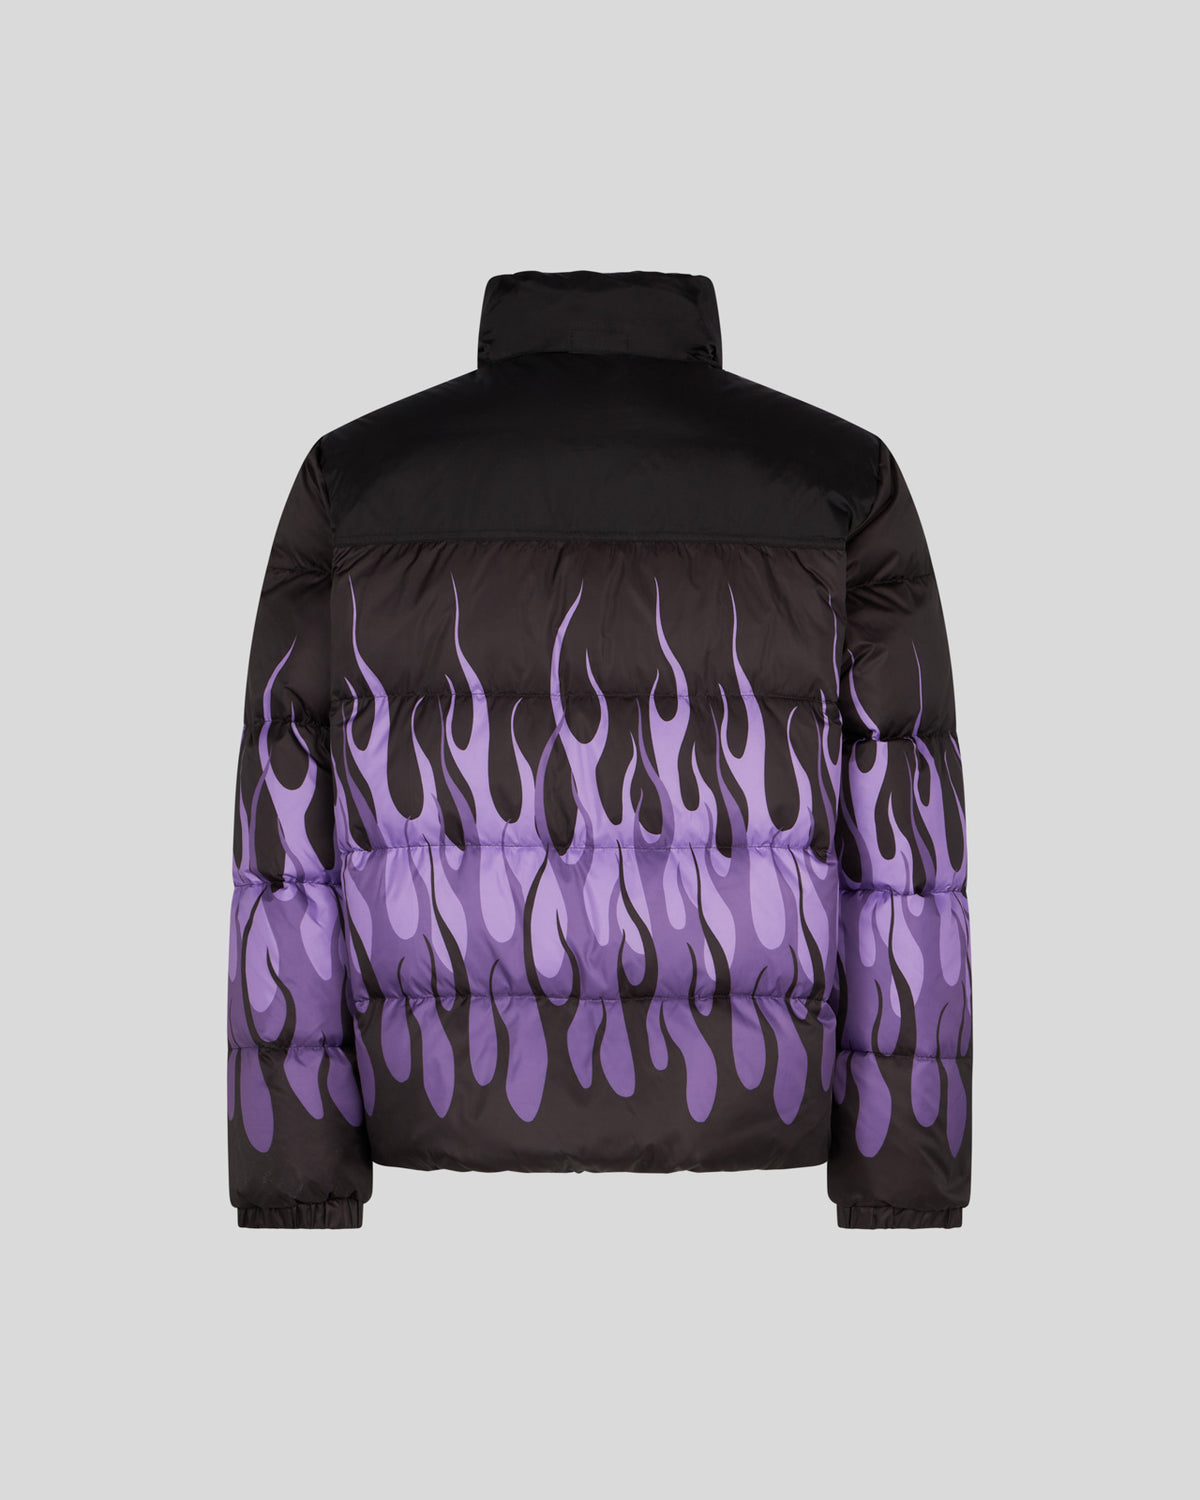 VISION OF SUPER BLACK PUFFY JACKET WITH PURPLE FLAMES